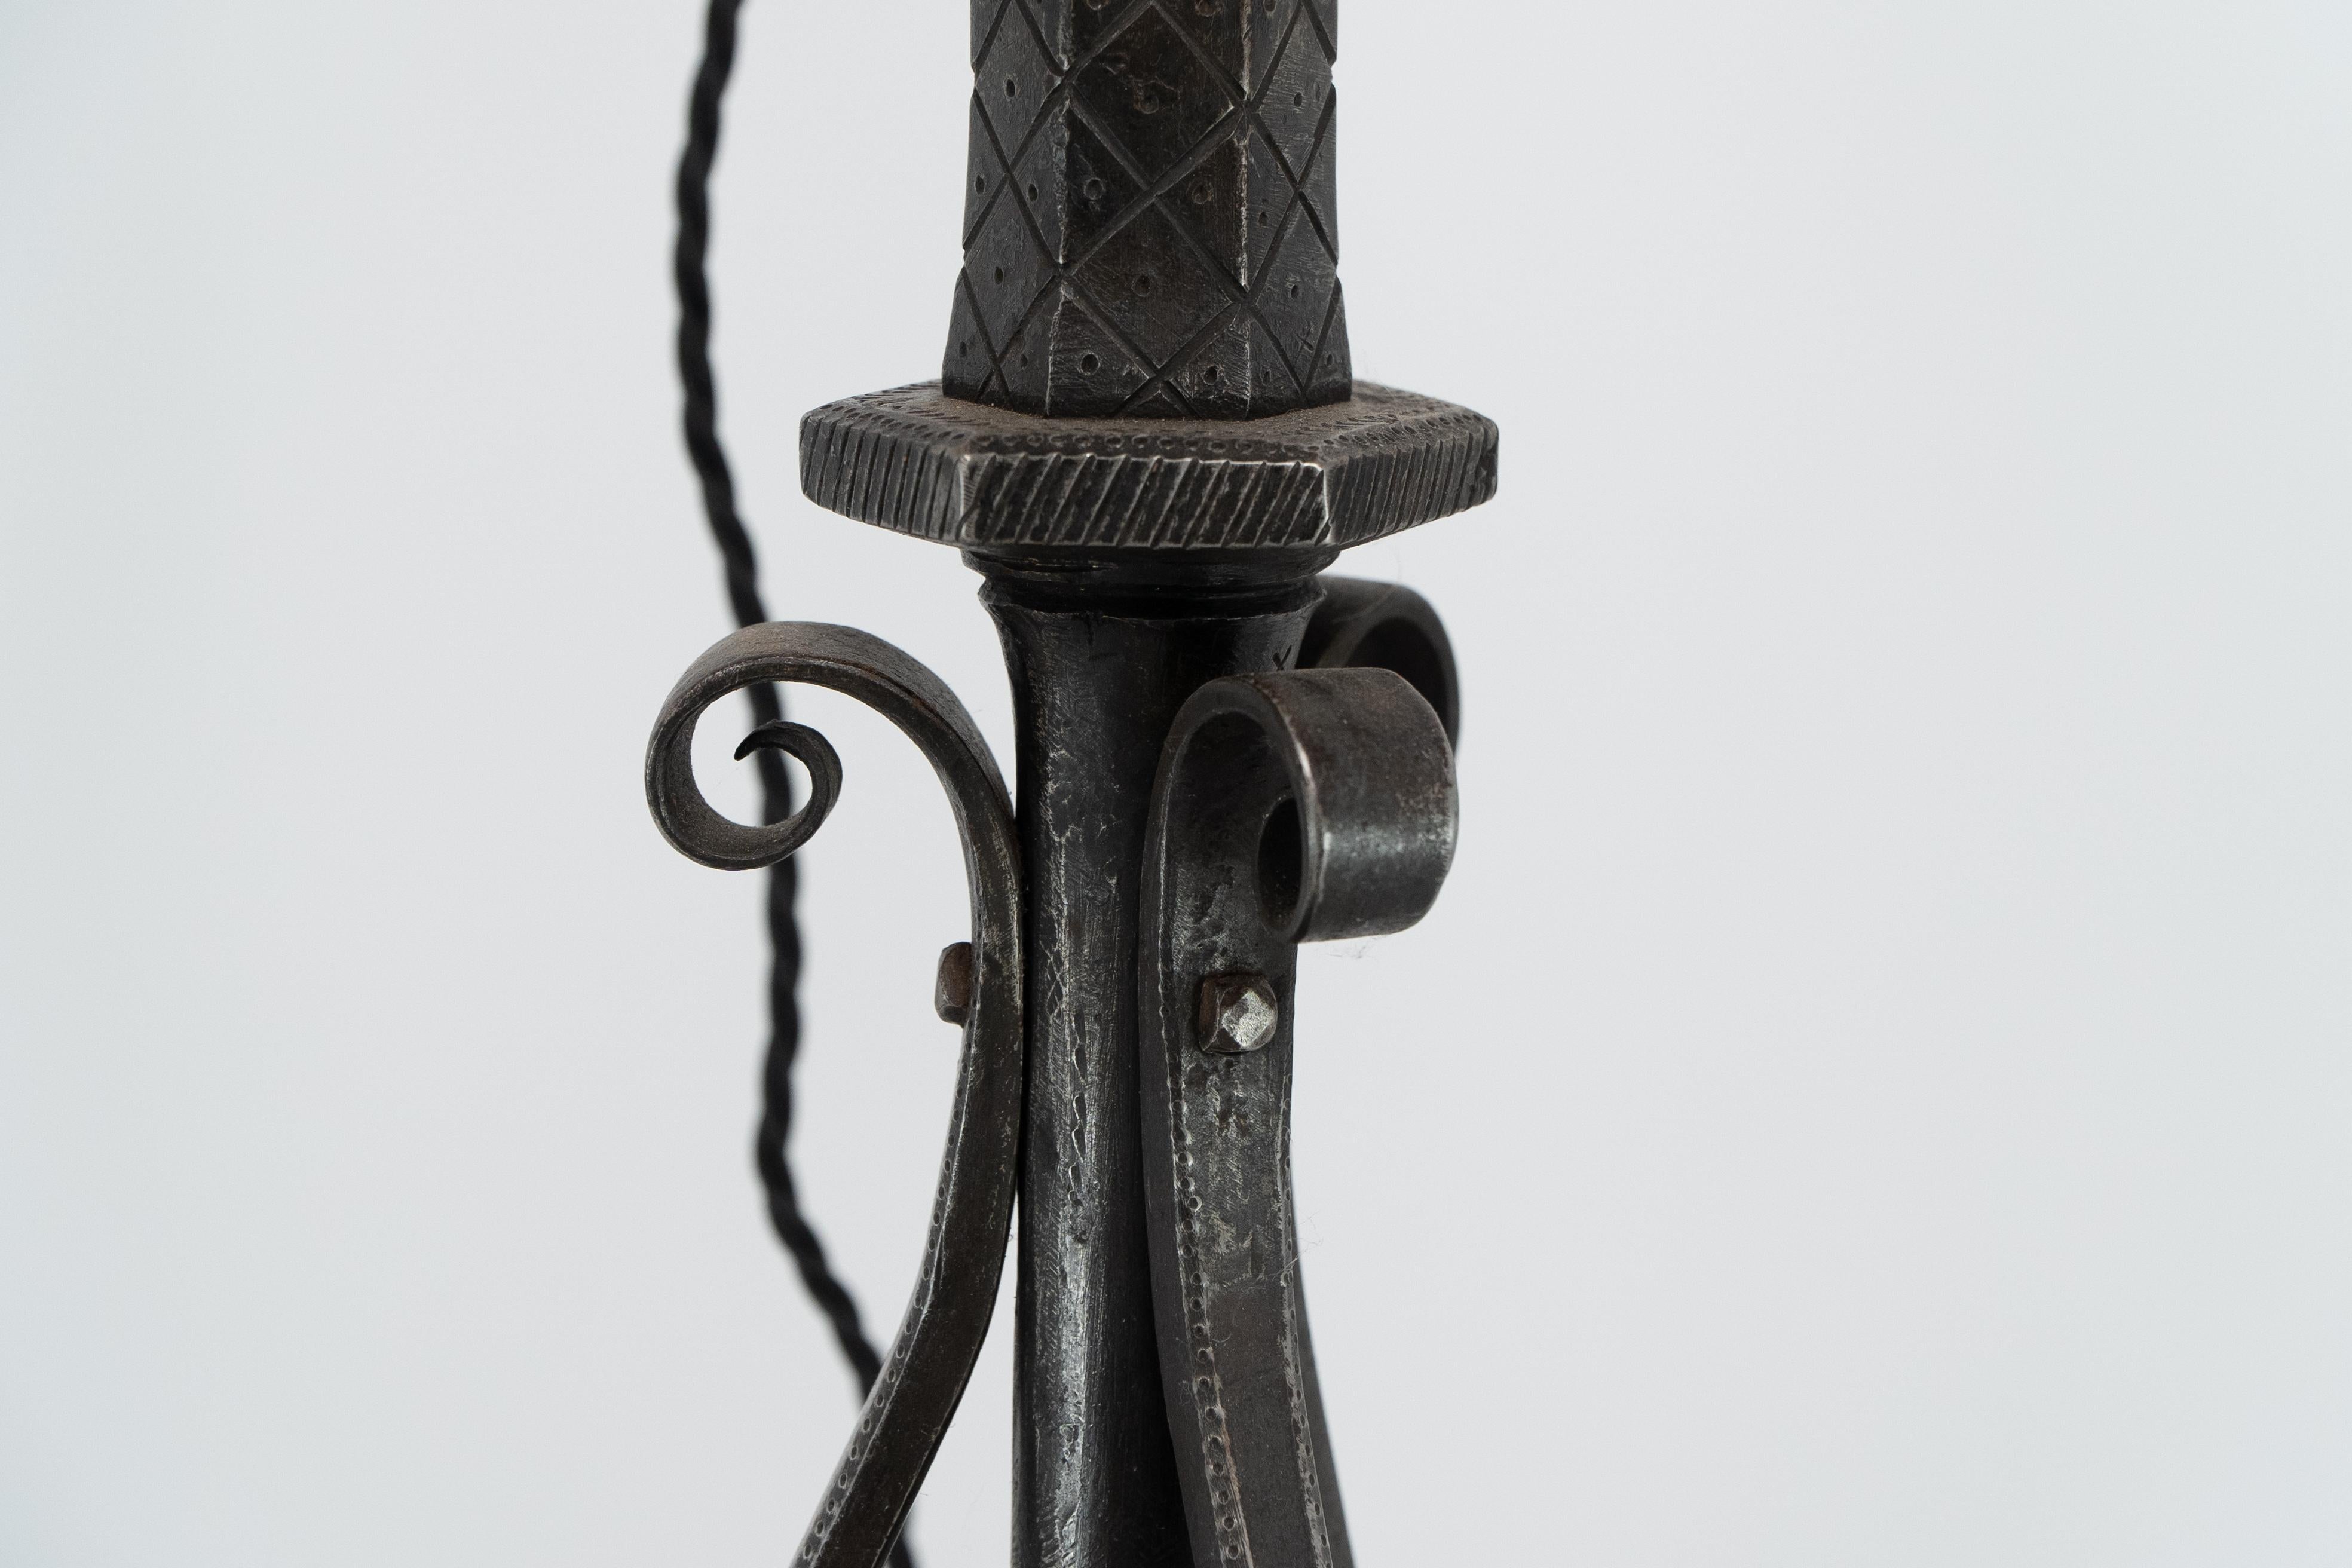 Steel Alfred Bucknell. A handmade steel standard lamp with finely chased details. For Sale